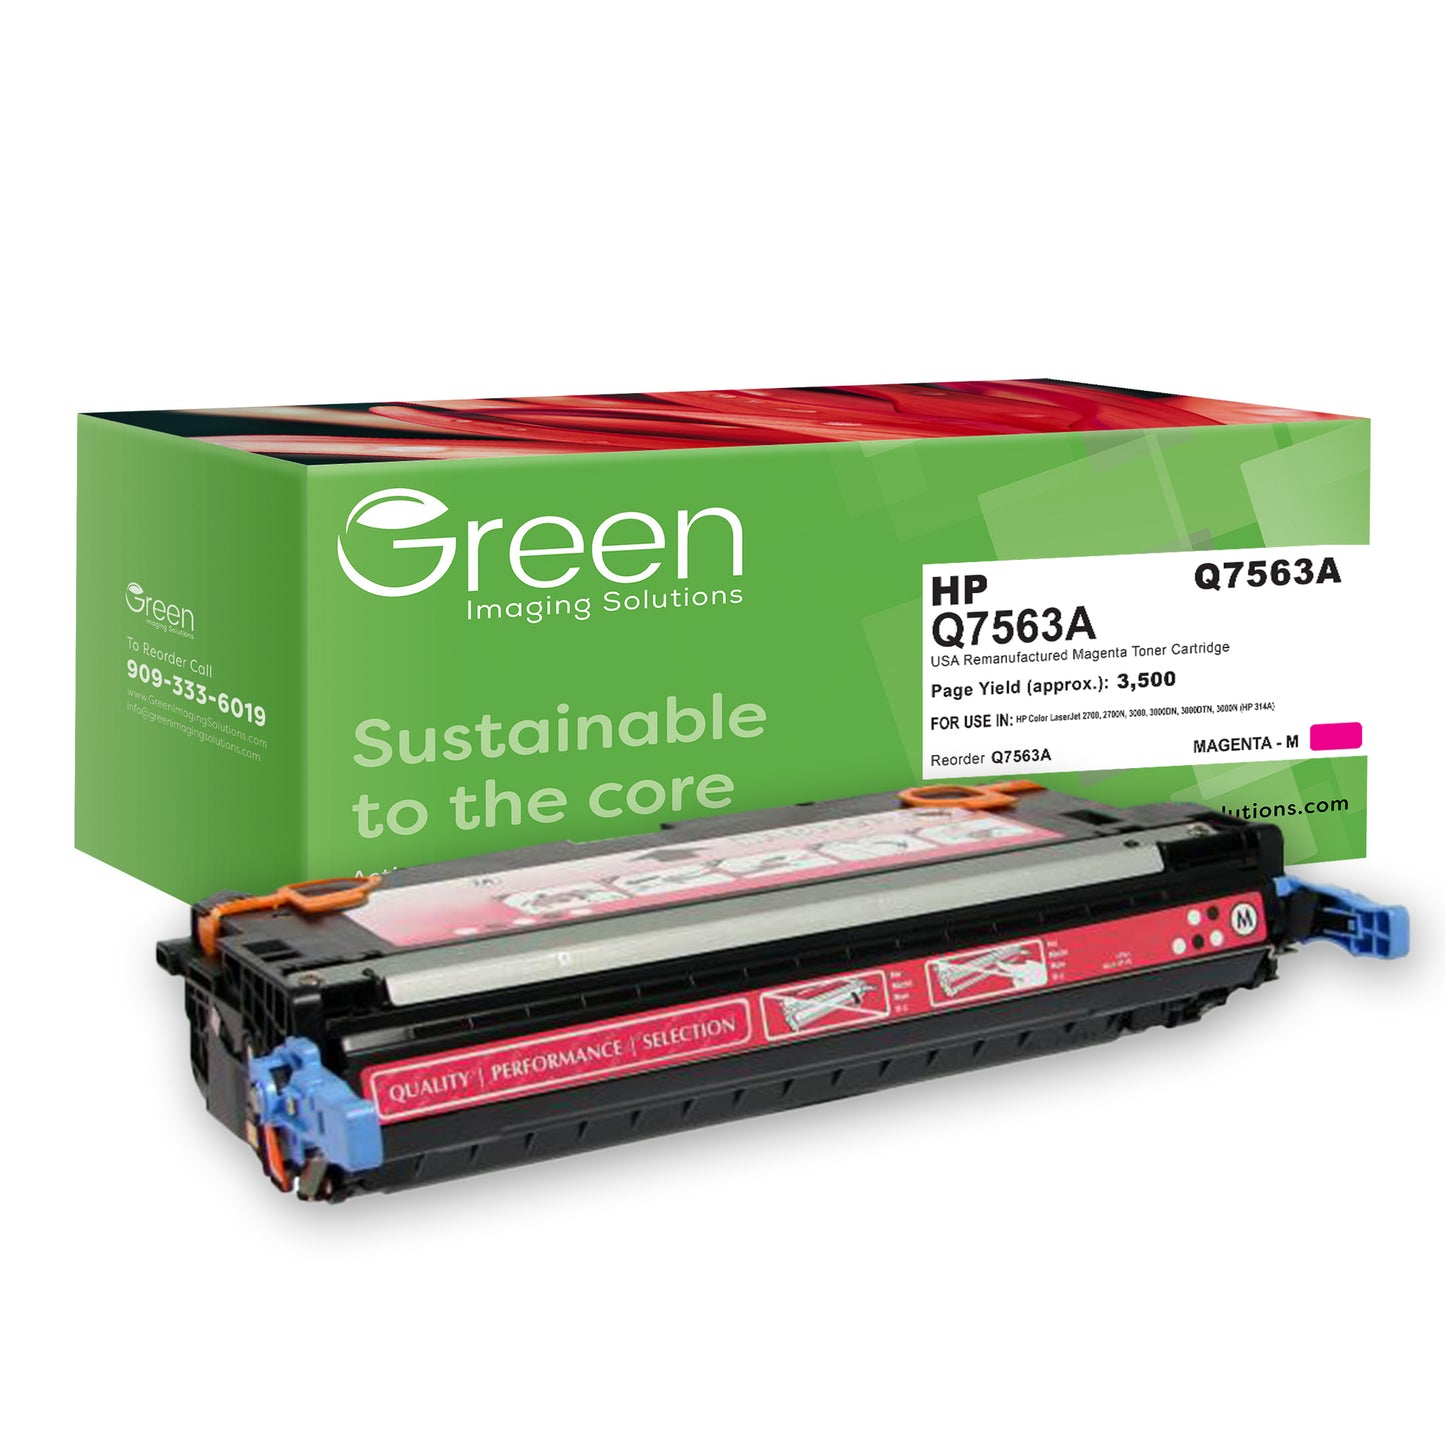 GIS USA Remanufactured Magenta Toner Cartridge for HP Q7563A (HP 314A)